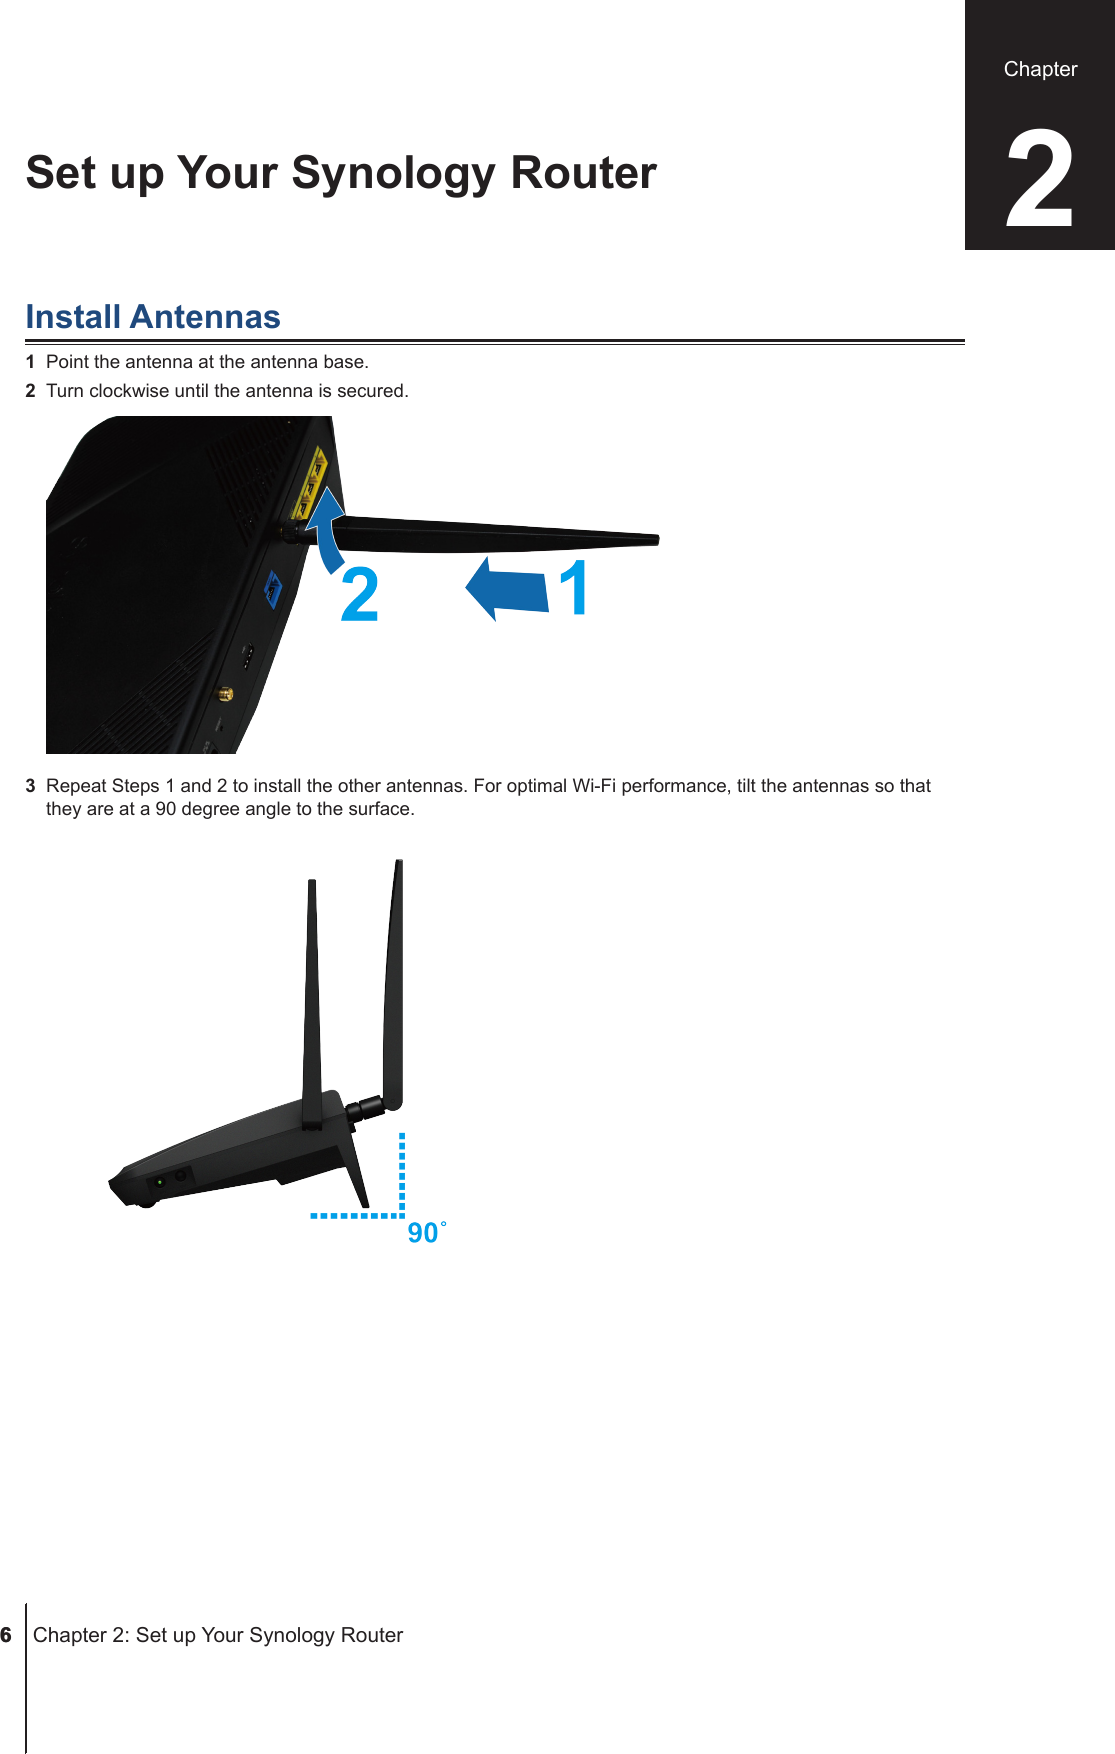  6  Chapter 2: Set up Your Synology RouterInstall Antennas1  Point the antenna at the antenna base. 2  Turn clockwise until the antenna is secured.3  Repeat Steps 1 and 2 to install the other antennas. For optimal Wi-Fi performance, tilt the antennas so that they are at a 90 degree angle to the surface.Set up Your Synology Router 2Chapter 6 